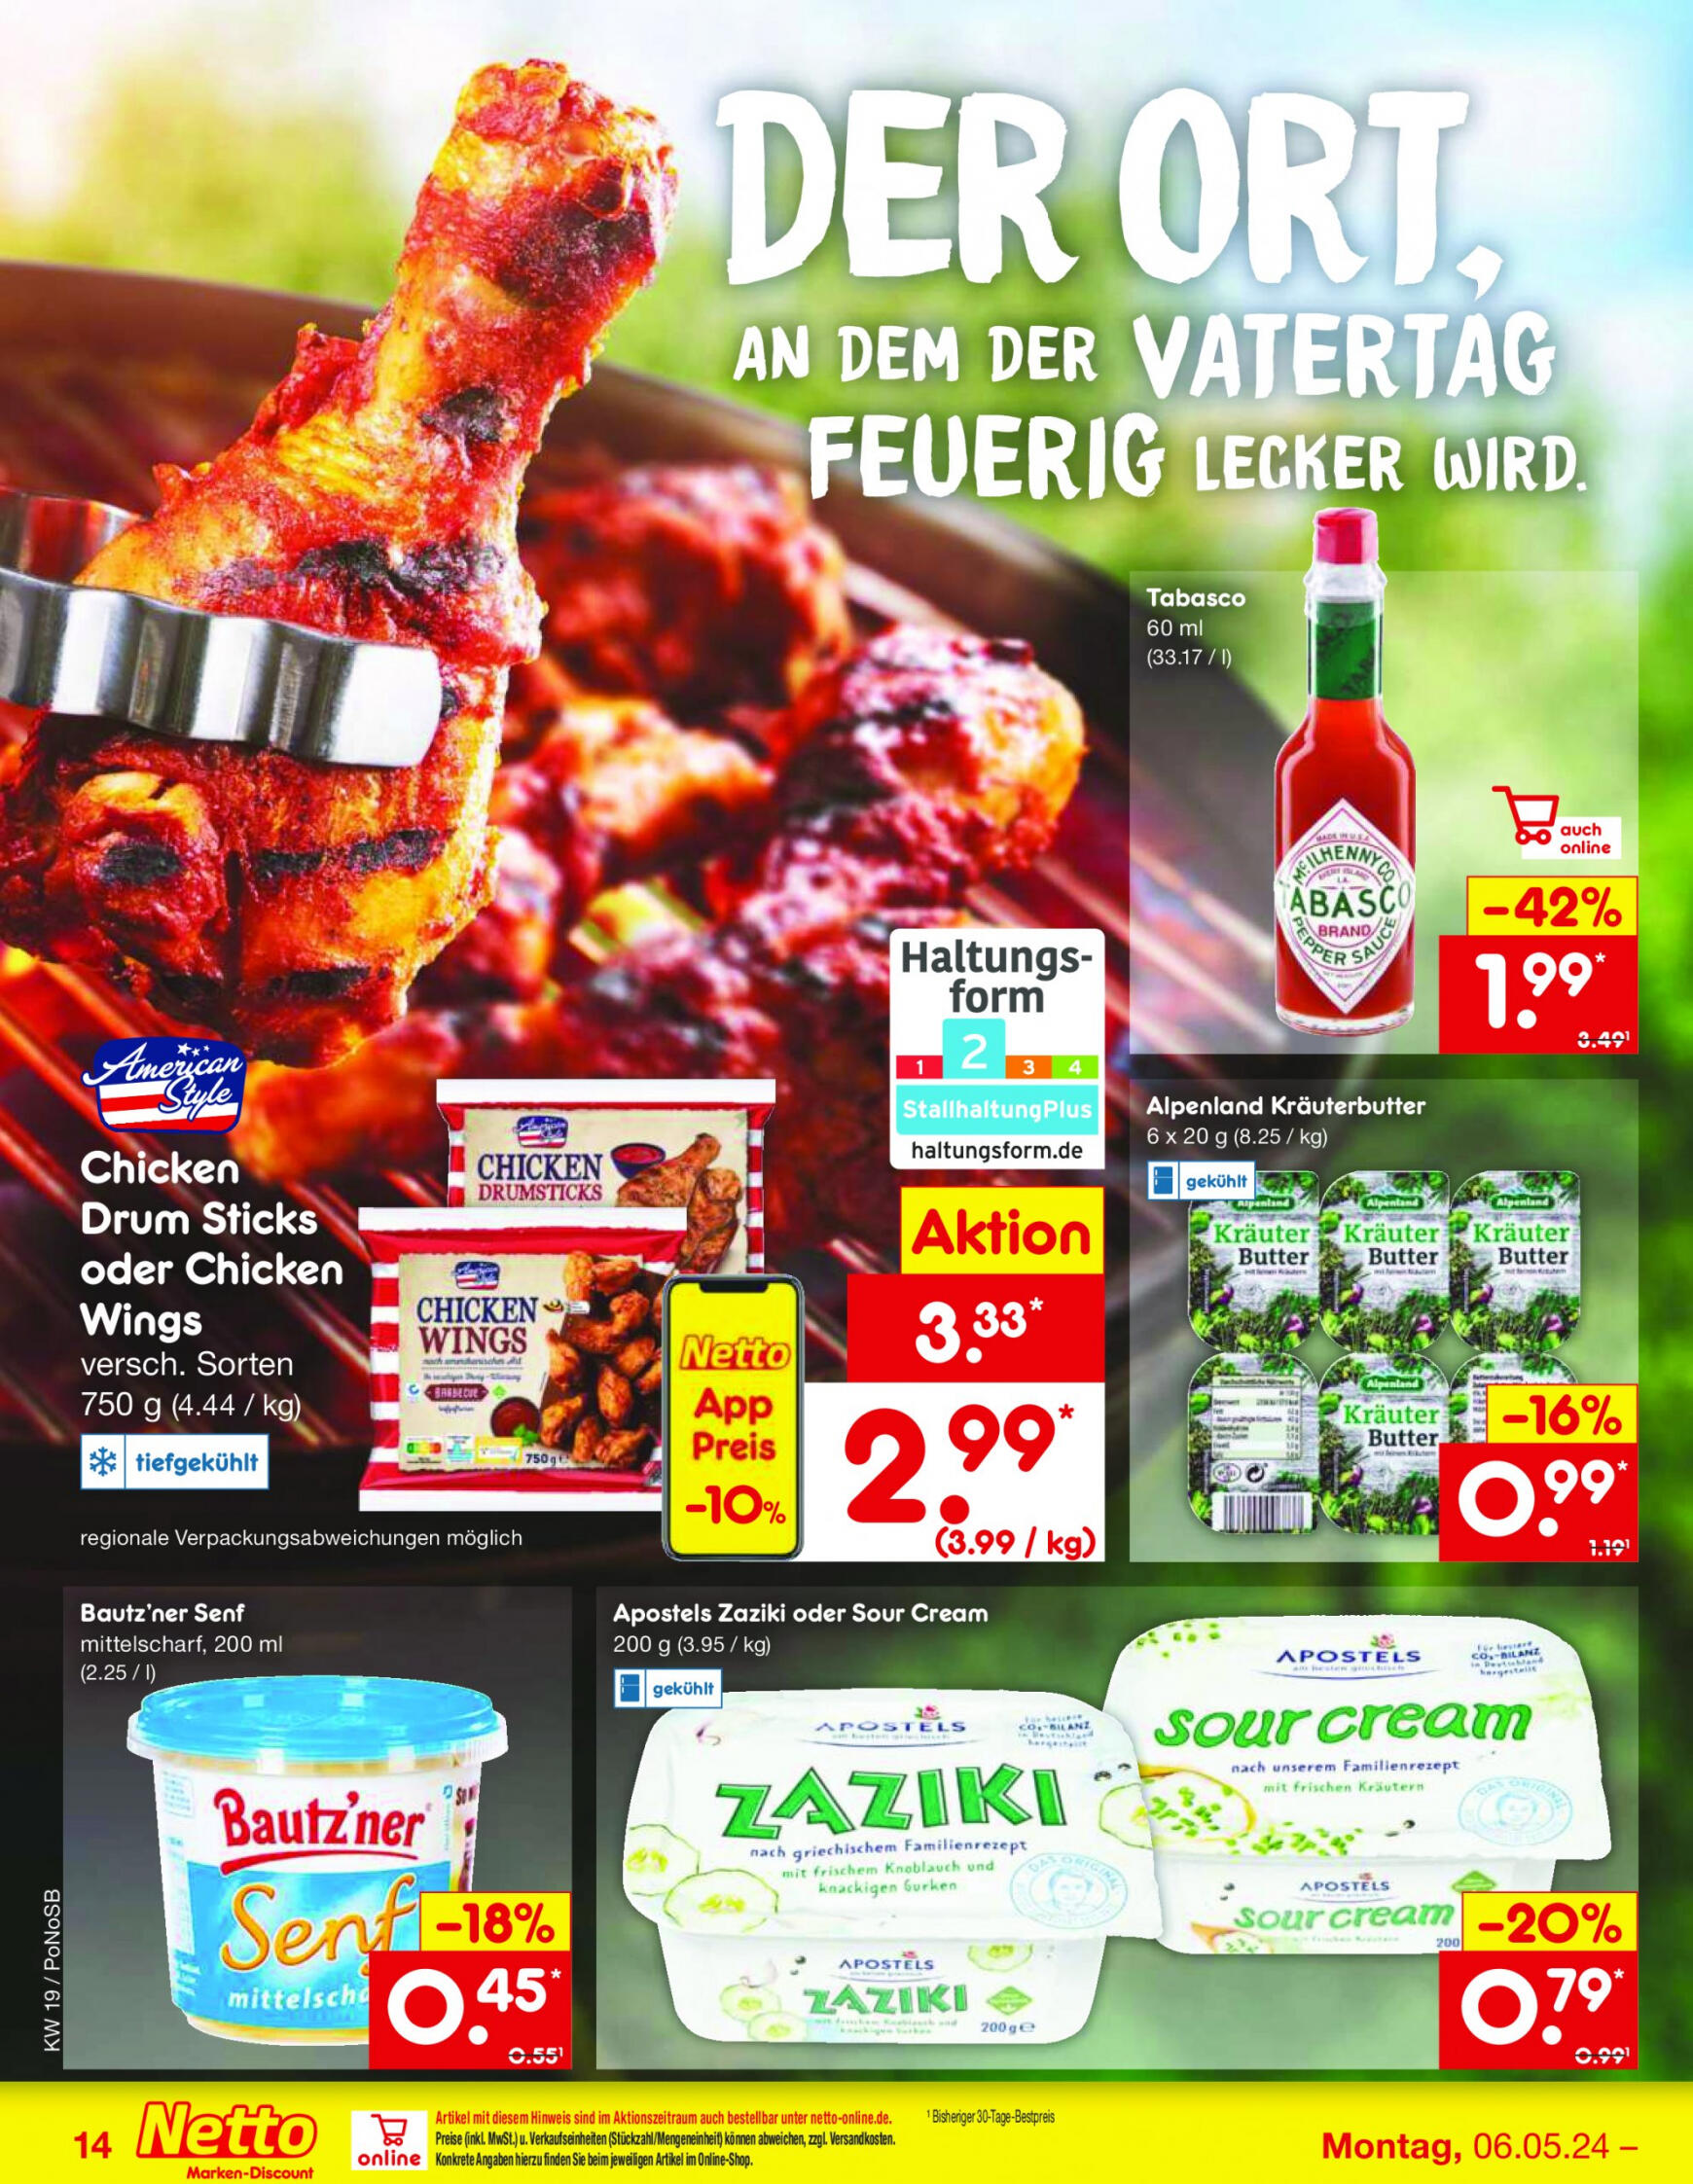 netto - Flyer Netto aktuell 06.05. - 11.05. - page: 14